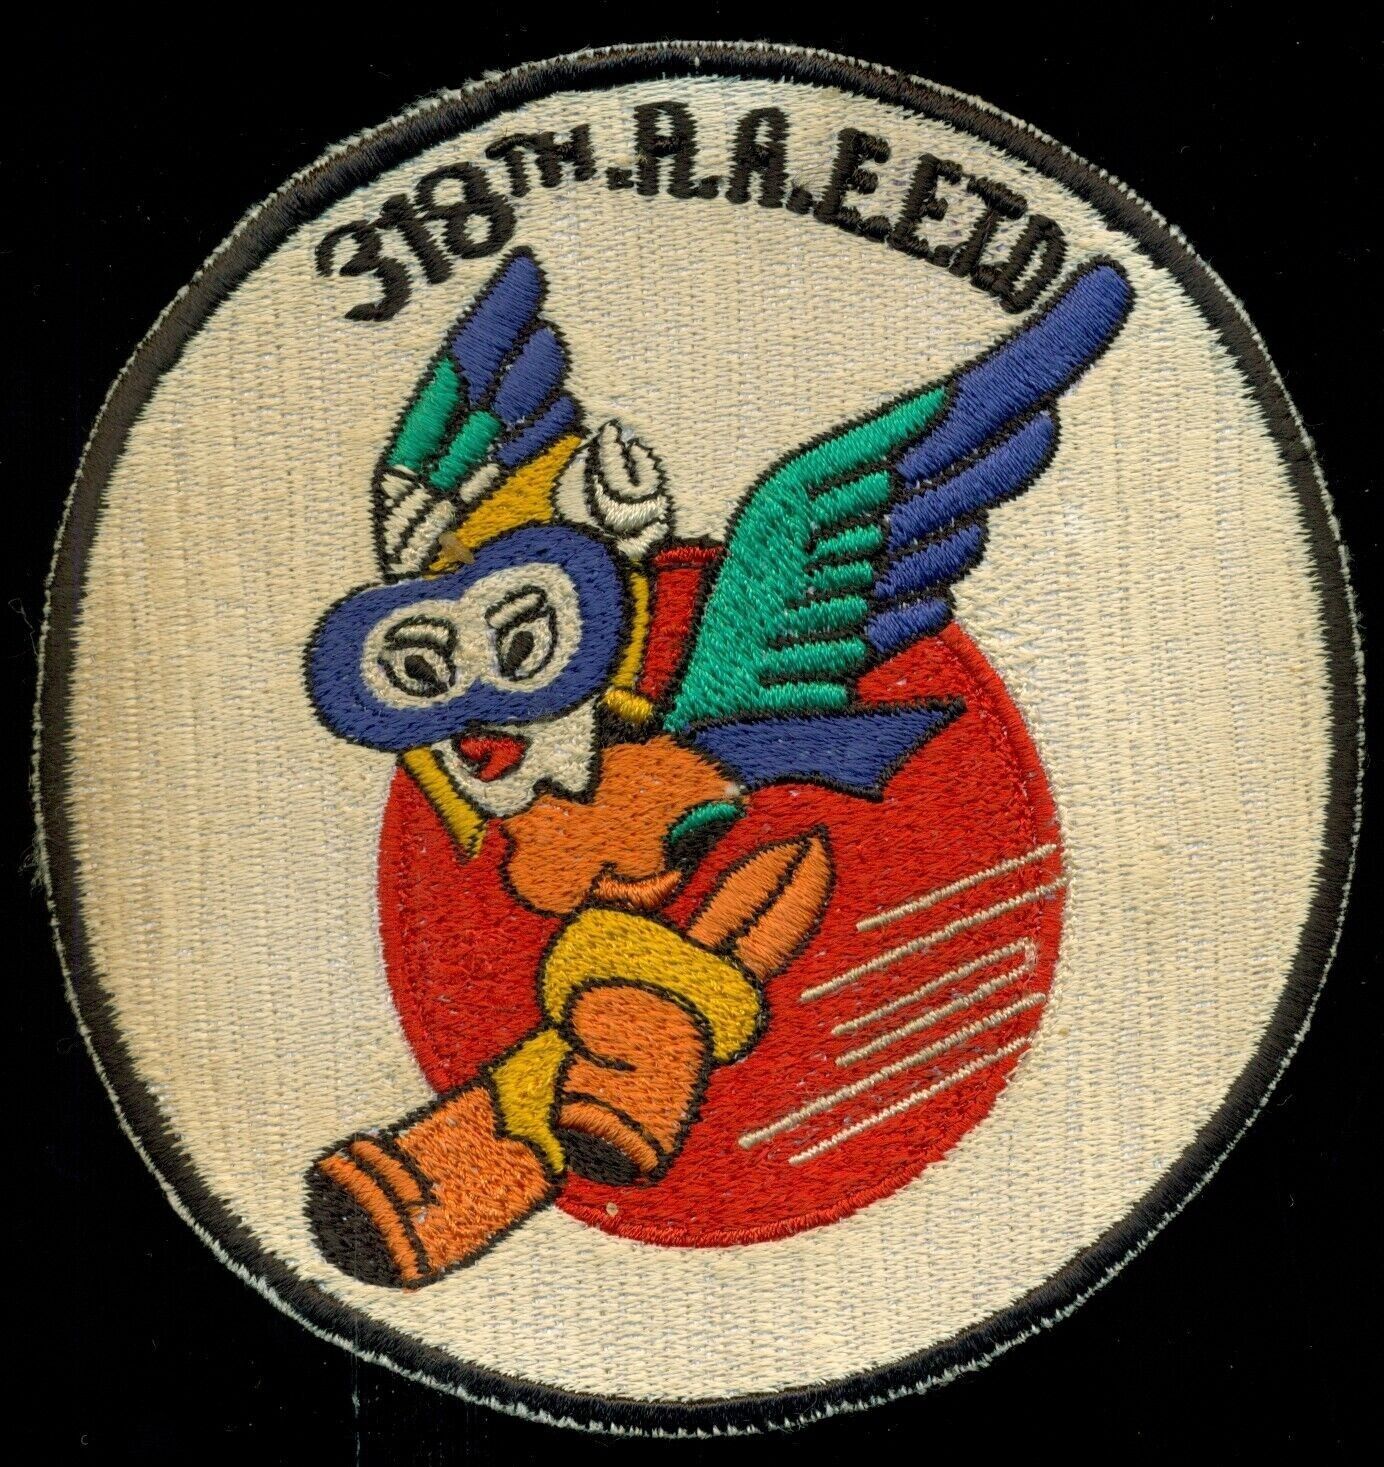 After WW2 USAAF Wasp 318th AAFTD Pilot Training Patch S-14A